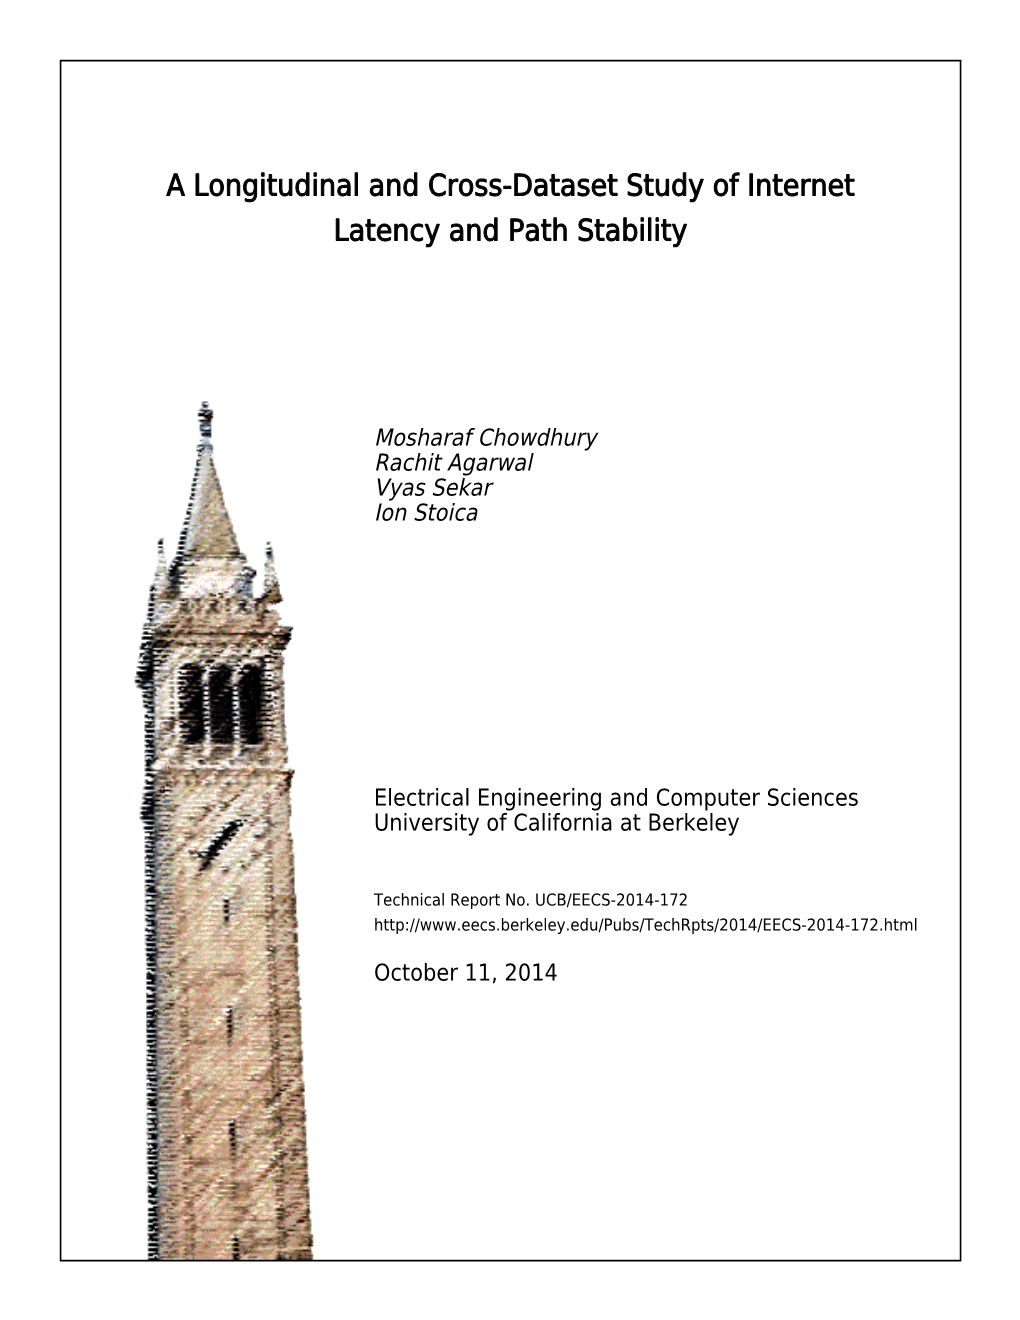 A Longitudinal and Cross-Dataset Study of Internet Latency and Path Stability